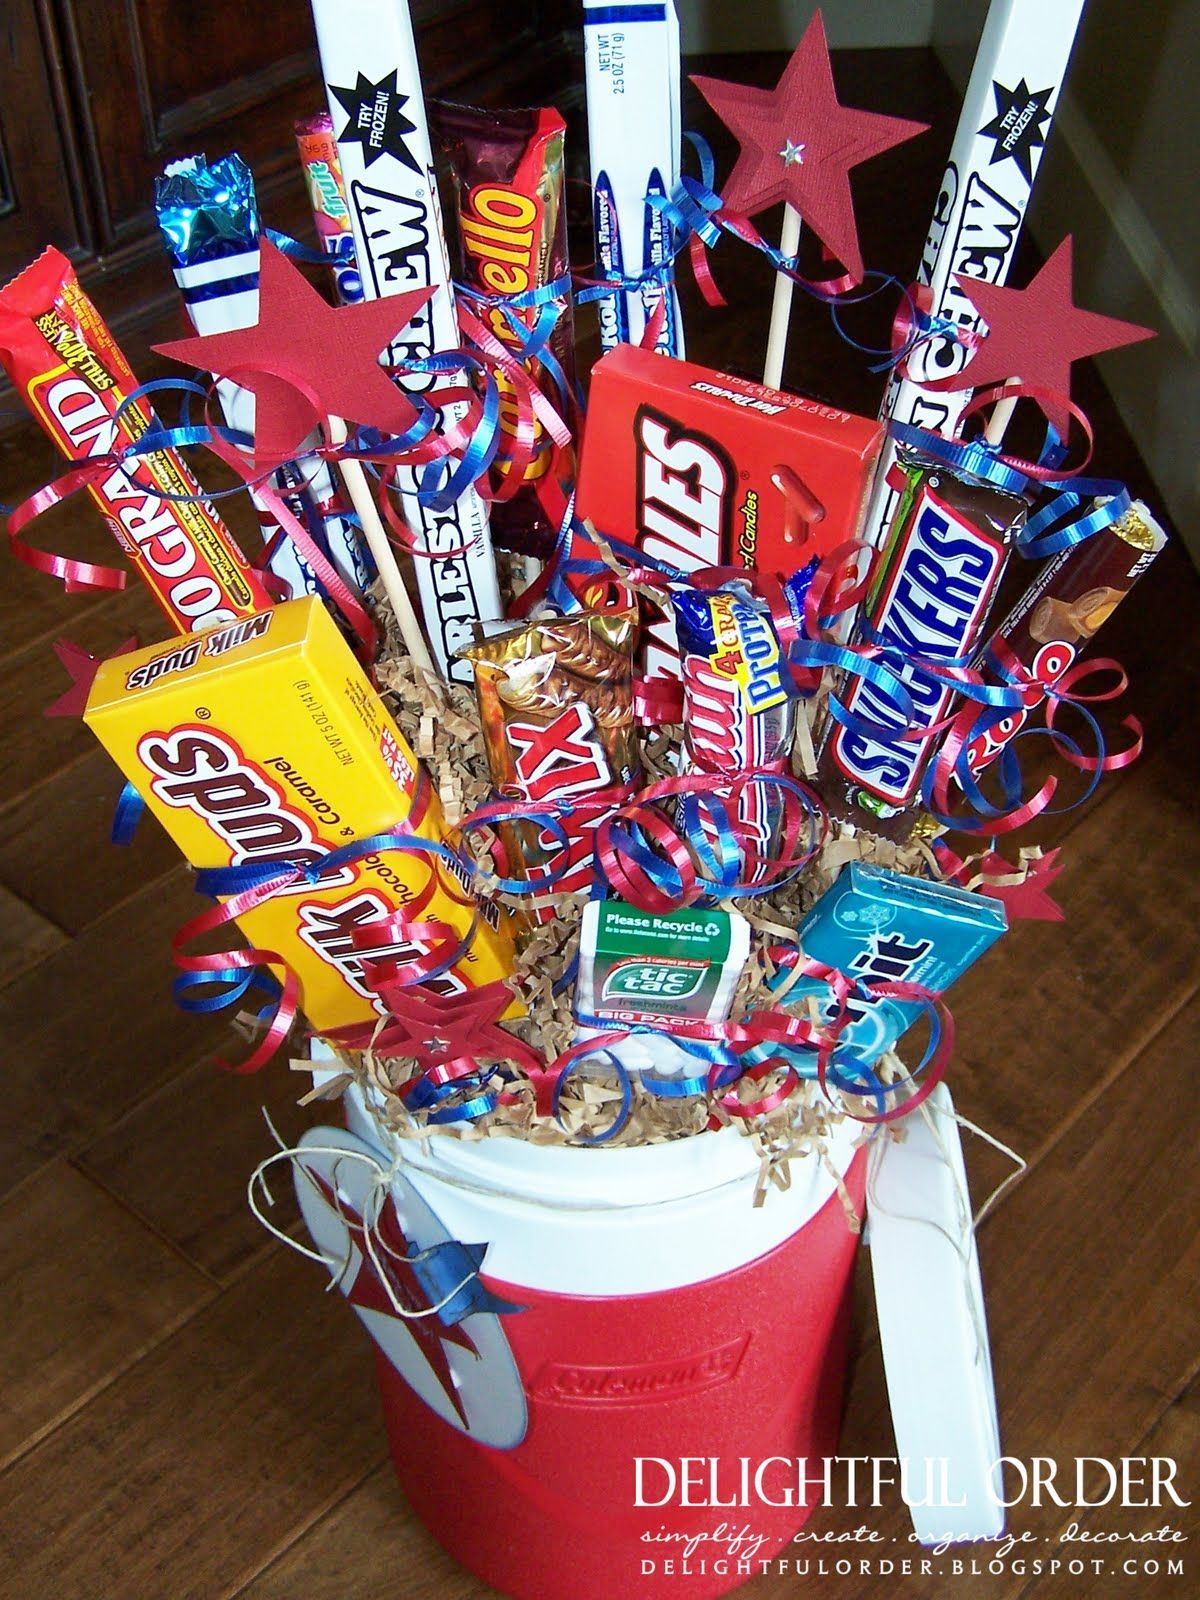 I like this gift basket idea in a big water jug… good for an athlete, play wit